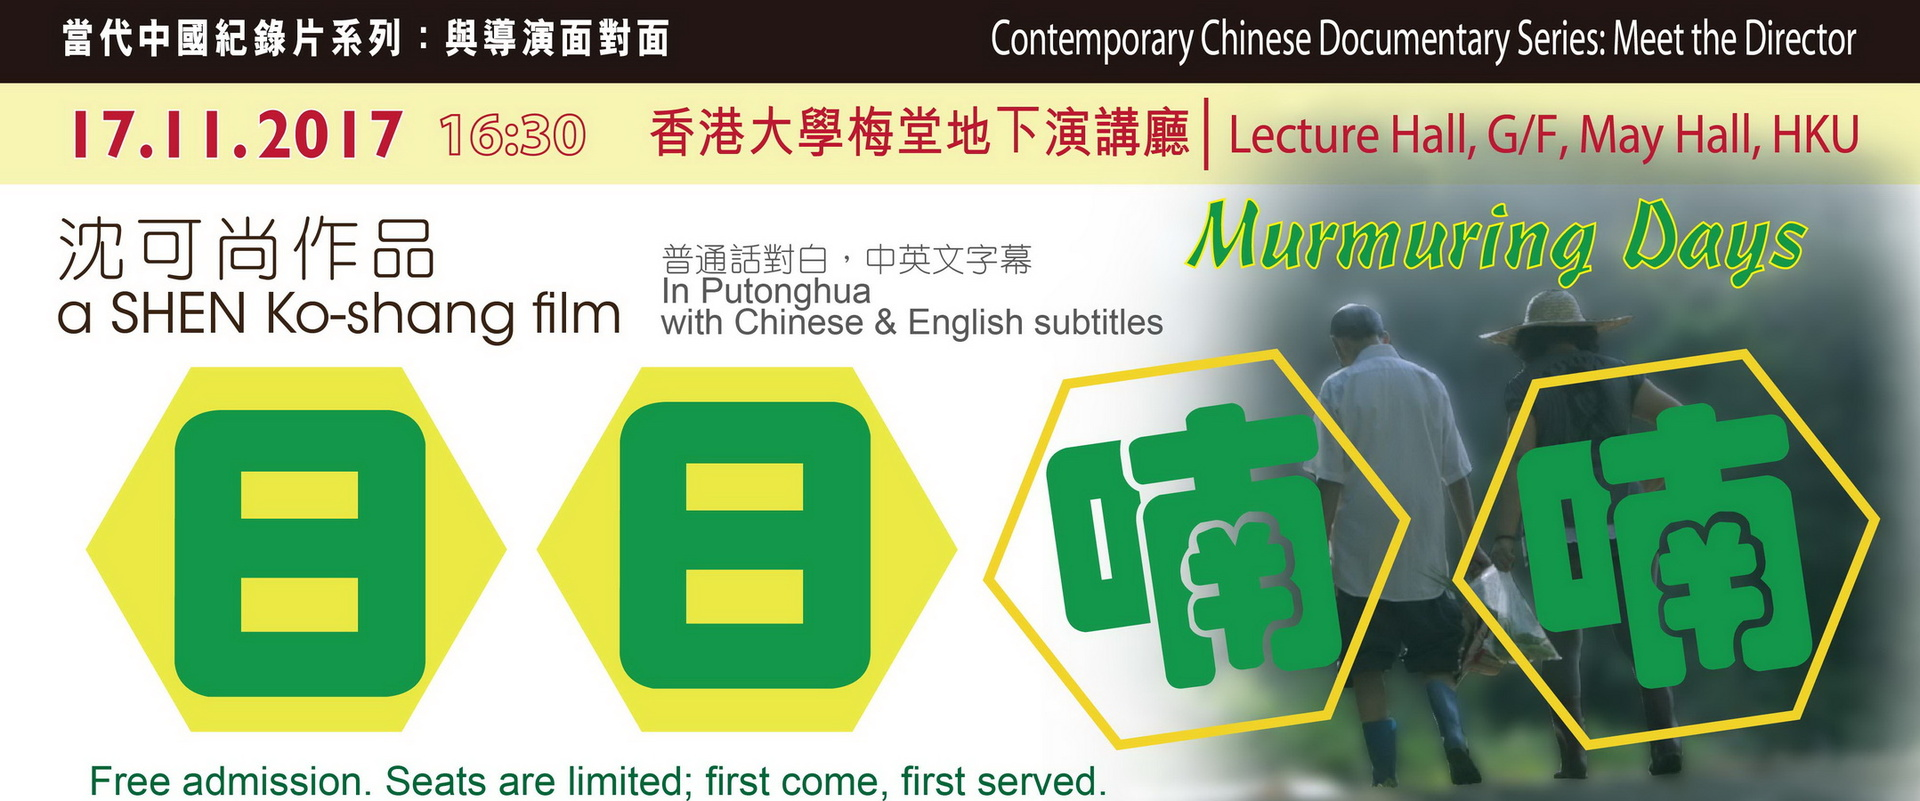 Contemporary Chinese Documentary Series: Meet the Director (Nov 17)